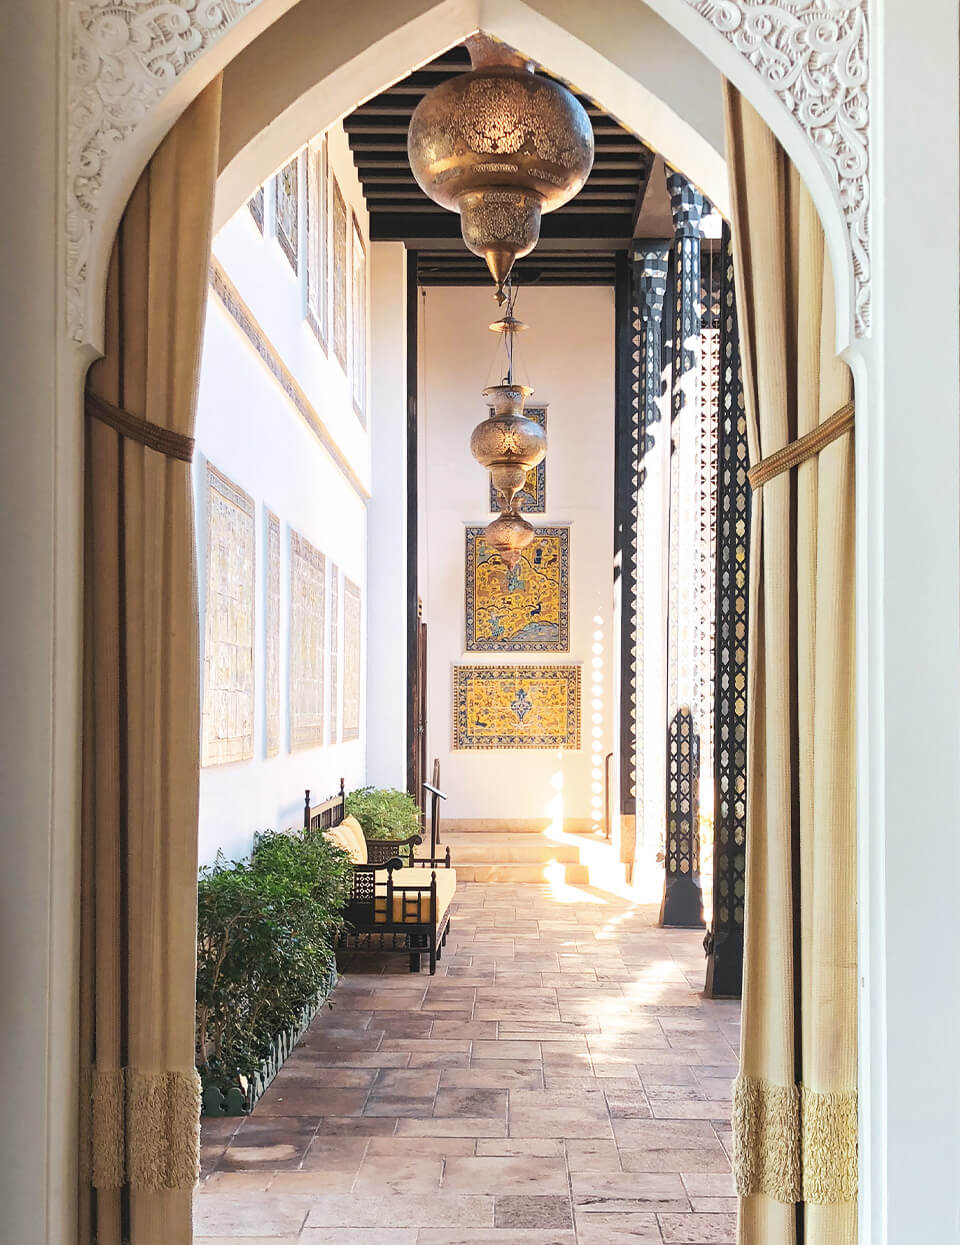 Shangri-La features Islamic art and architecture